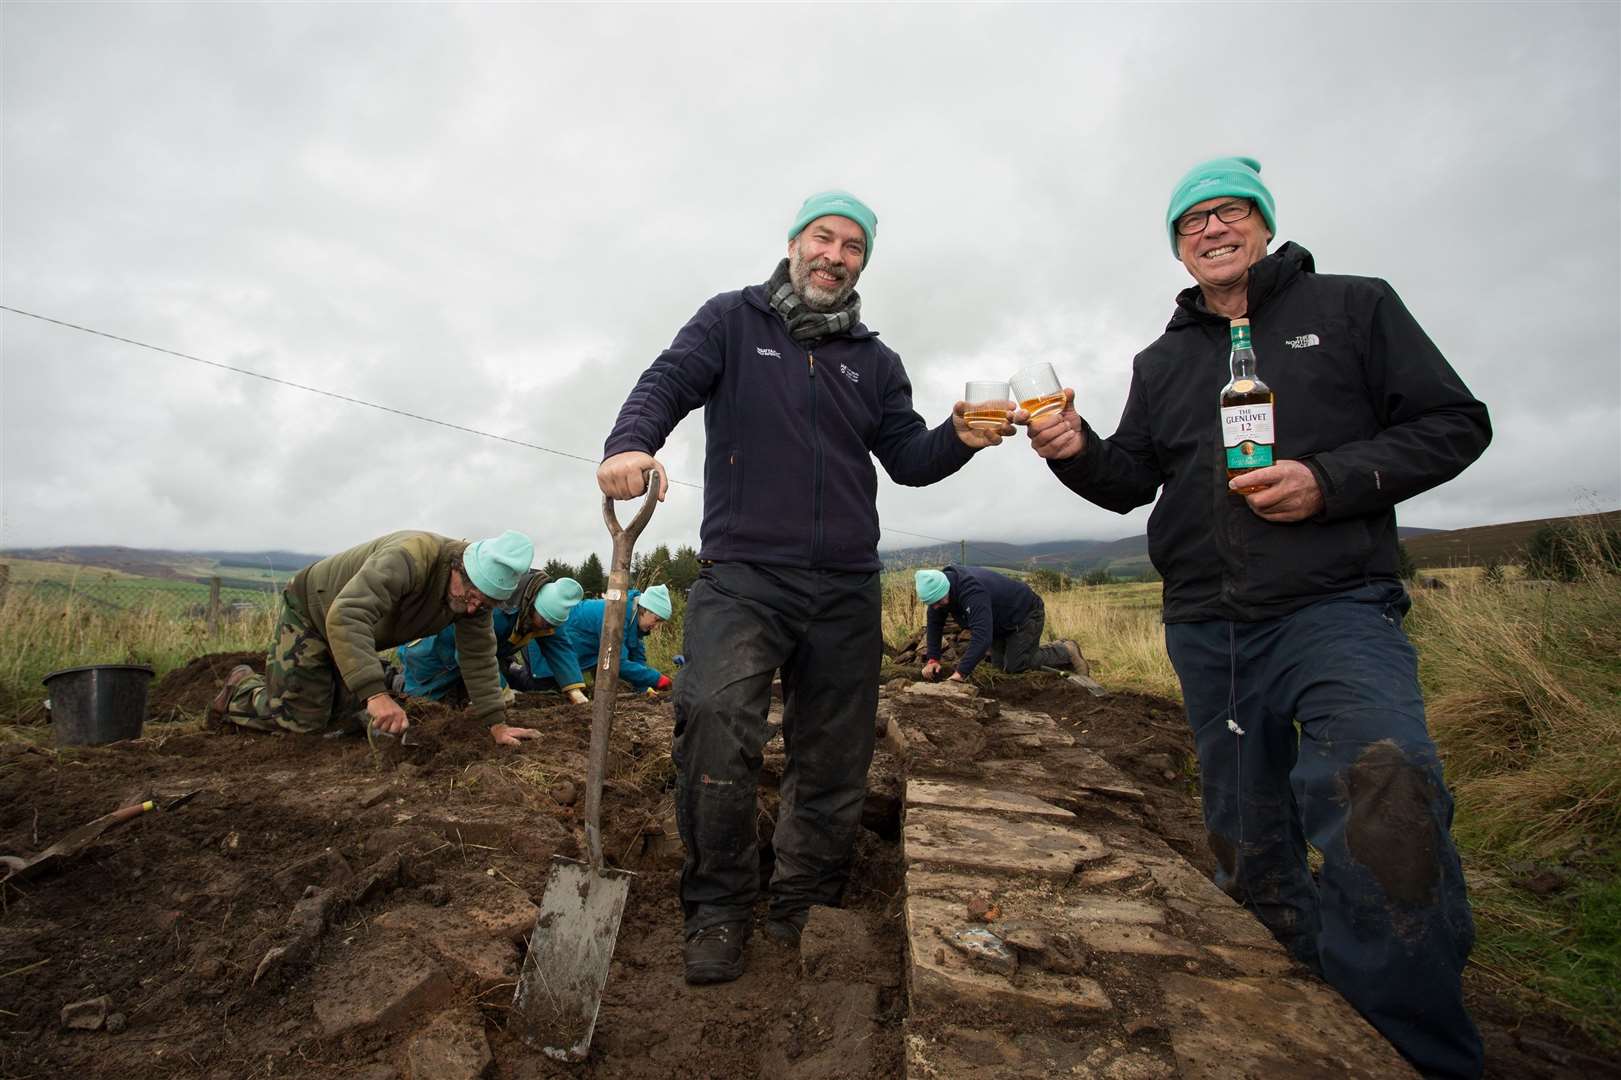 Derek Alexander and Alan Winchester at the dig site. Photo: Alison White.